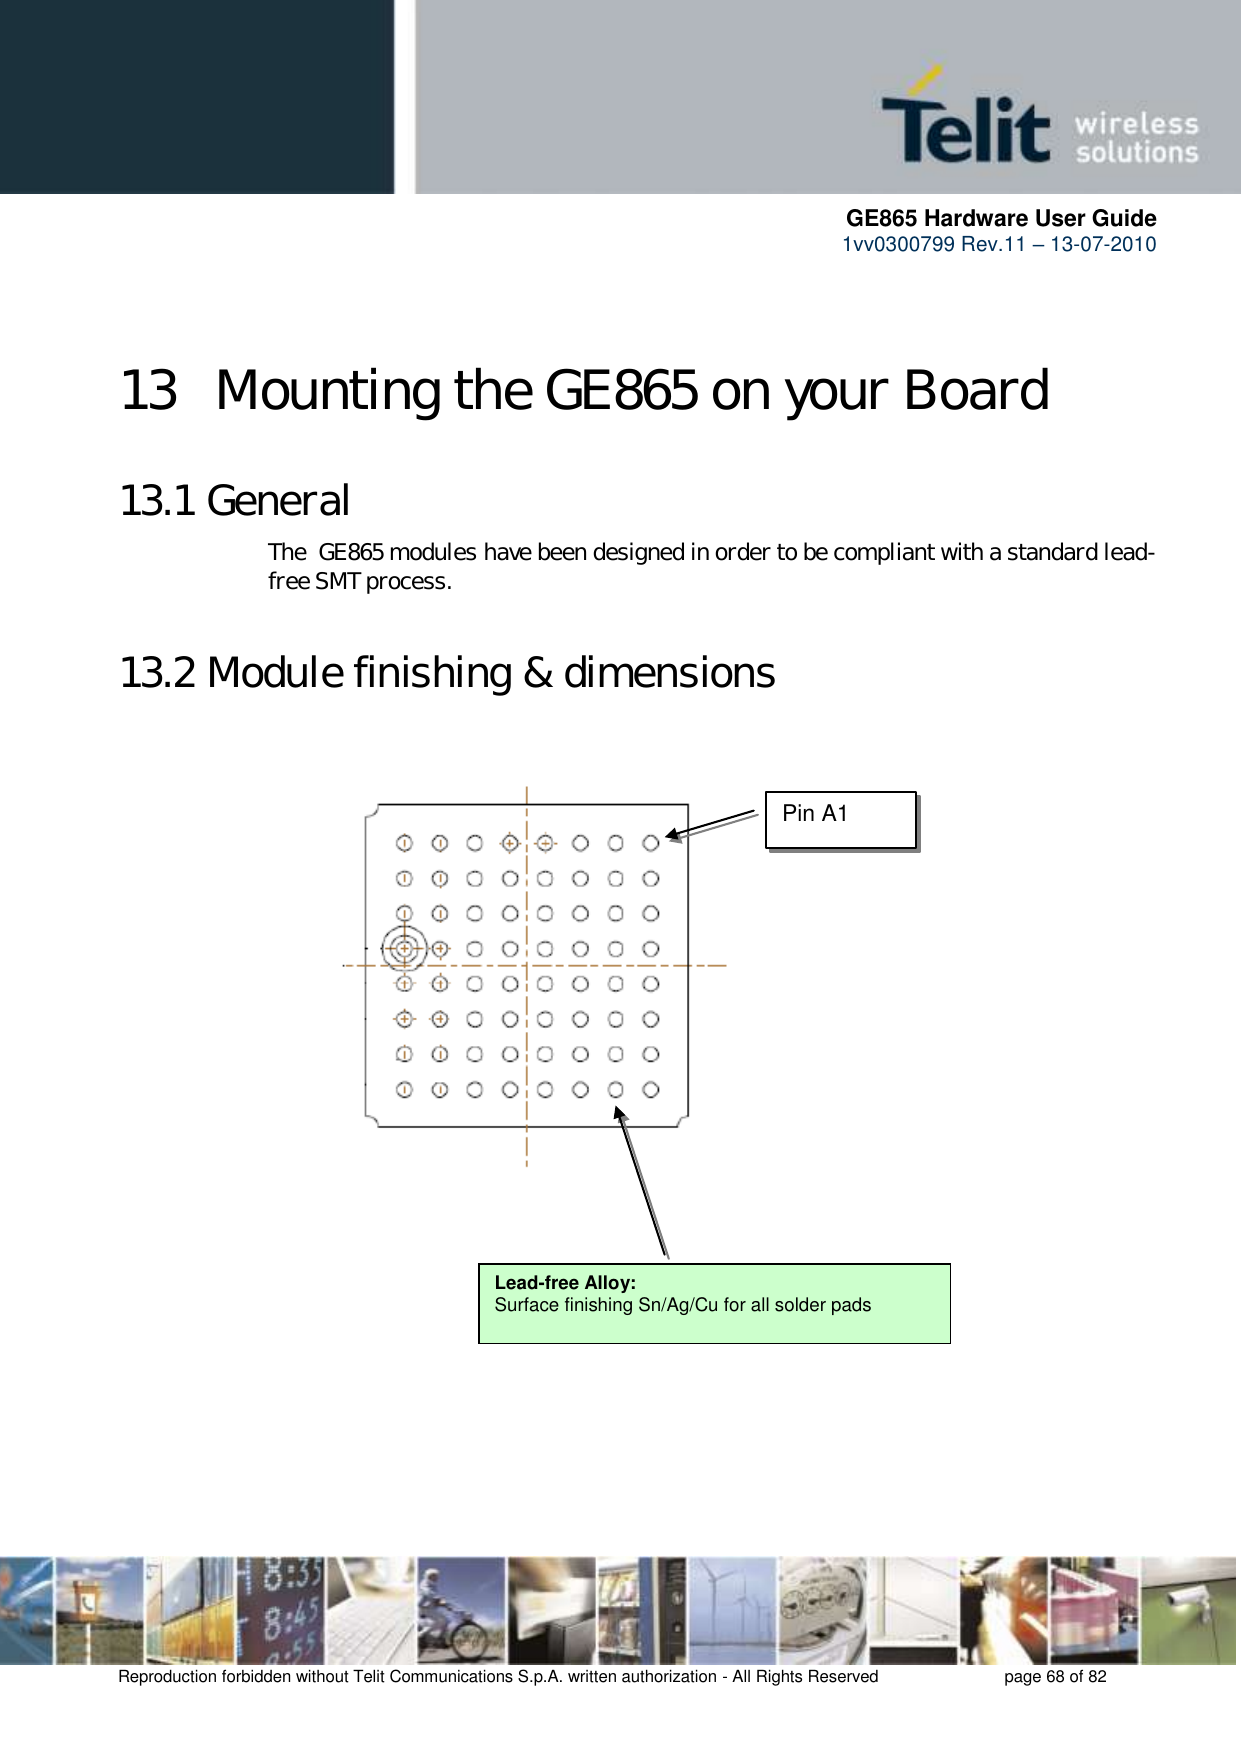      GE865 Hardware User Guide 1vv0300799 Rev.11 – 13-07-2010       Reproduction forbidden without Telit Communications S.p.A. written authorization - All Rights Reserved    page 68 of 82  13  Mounting the GE865 on your Board 13.1 General The  GE865 modules have been designed in order to be compliant with a standard lead-free SMT process. 13.2 Module finishing &amp; dimensions                             Lead-free Alloy: Surface finishing Sn/Ag/Cu for all solder pads Pin A1 